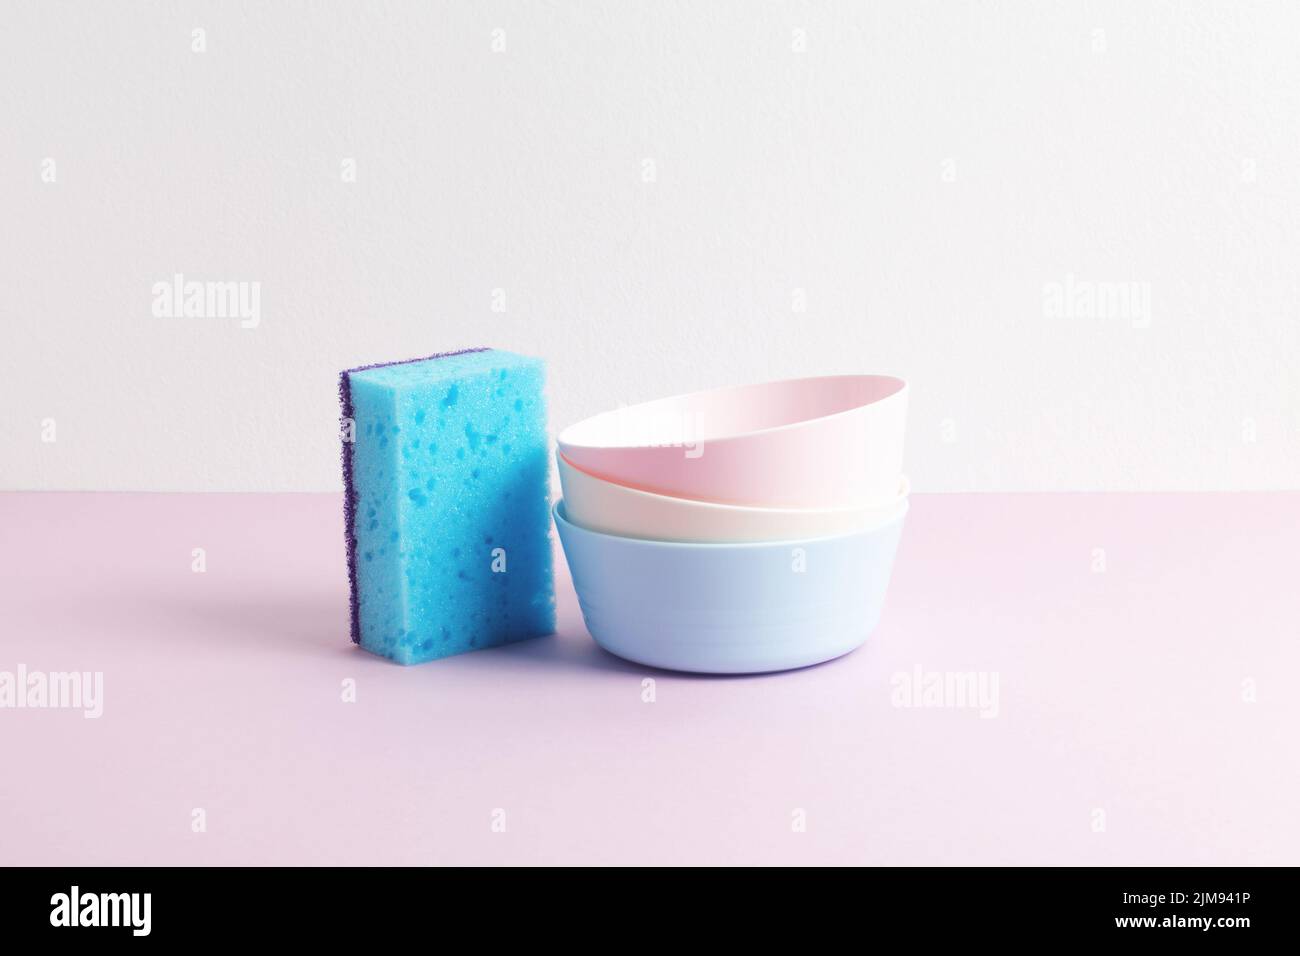 Blue sponge and colorful clean plates on pink and white background. Pastel colors. Front view. Dishwashing concept. Stock Photo